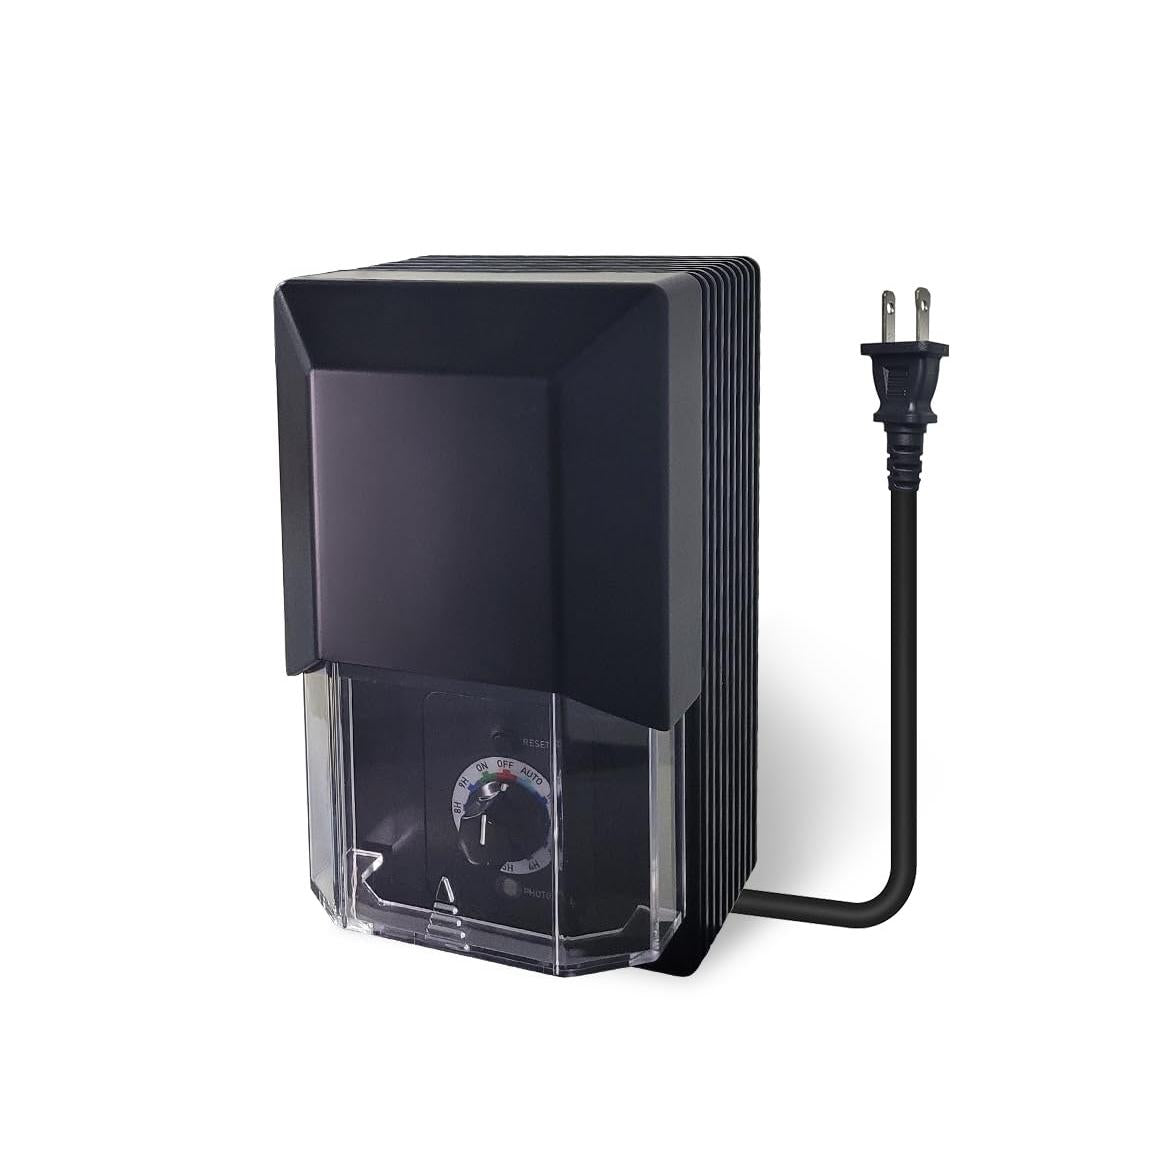 100W 200W Multi-Tap Low Voltage Transformer for Outdoor Landscape Lighting with Timer and Photocell Sensor COT711P